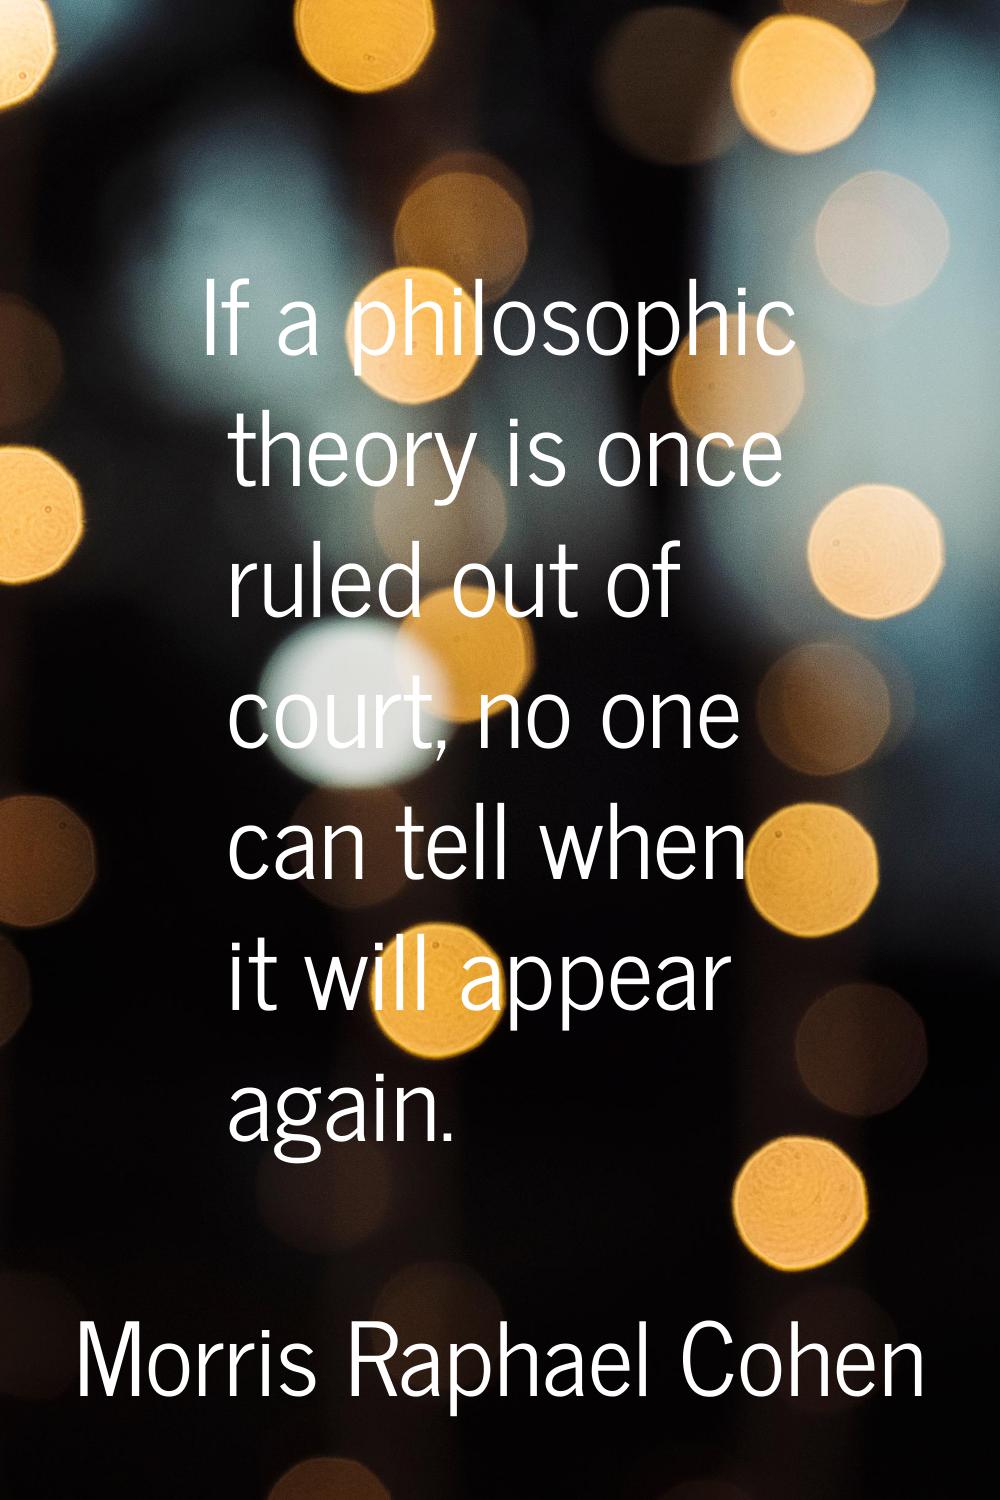 If a philosophic theory is once ruled out of court, no one can tell when it will appear again.